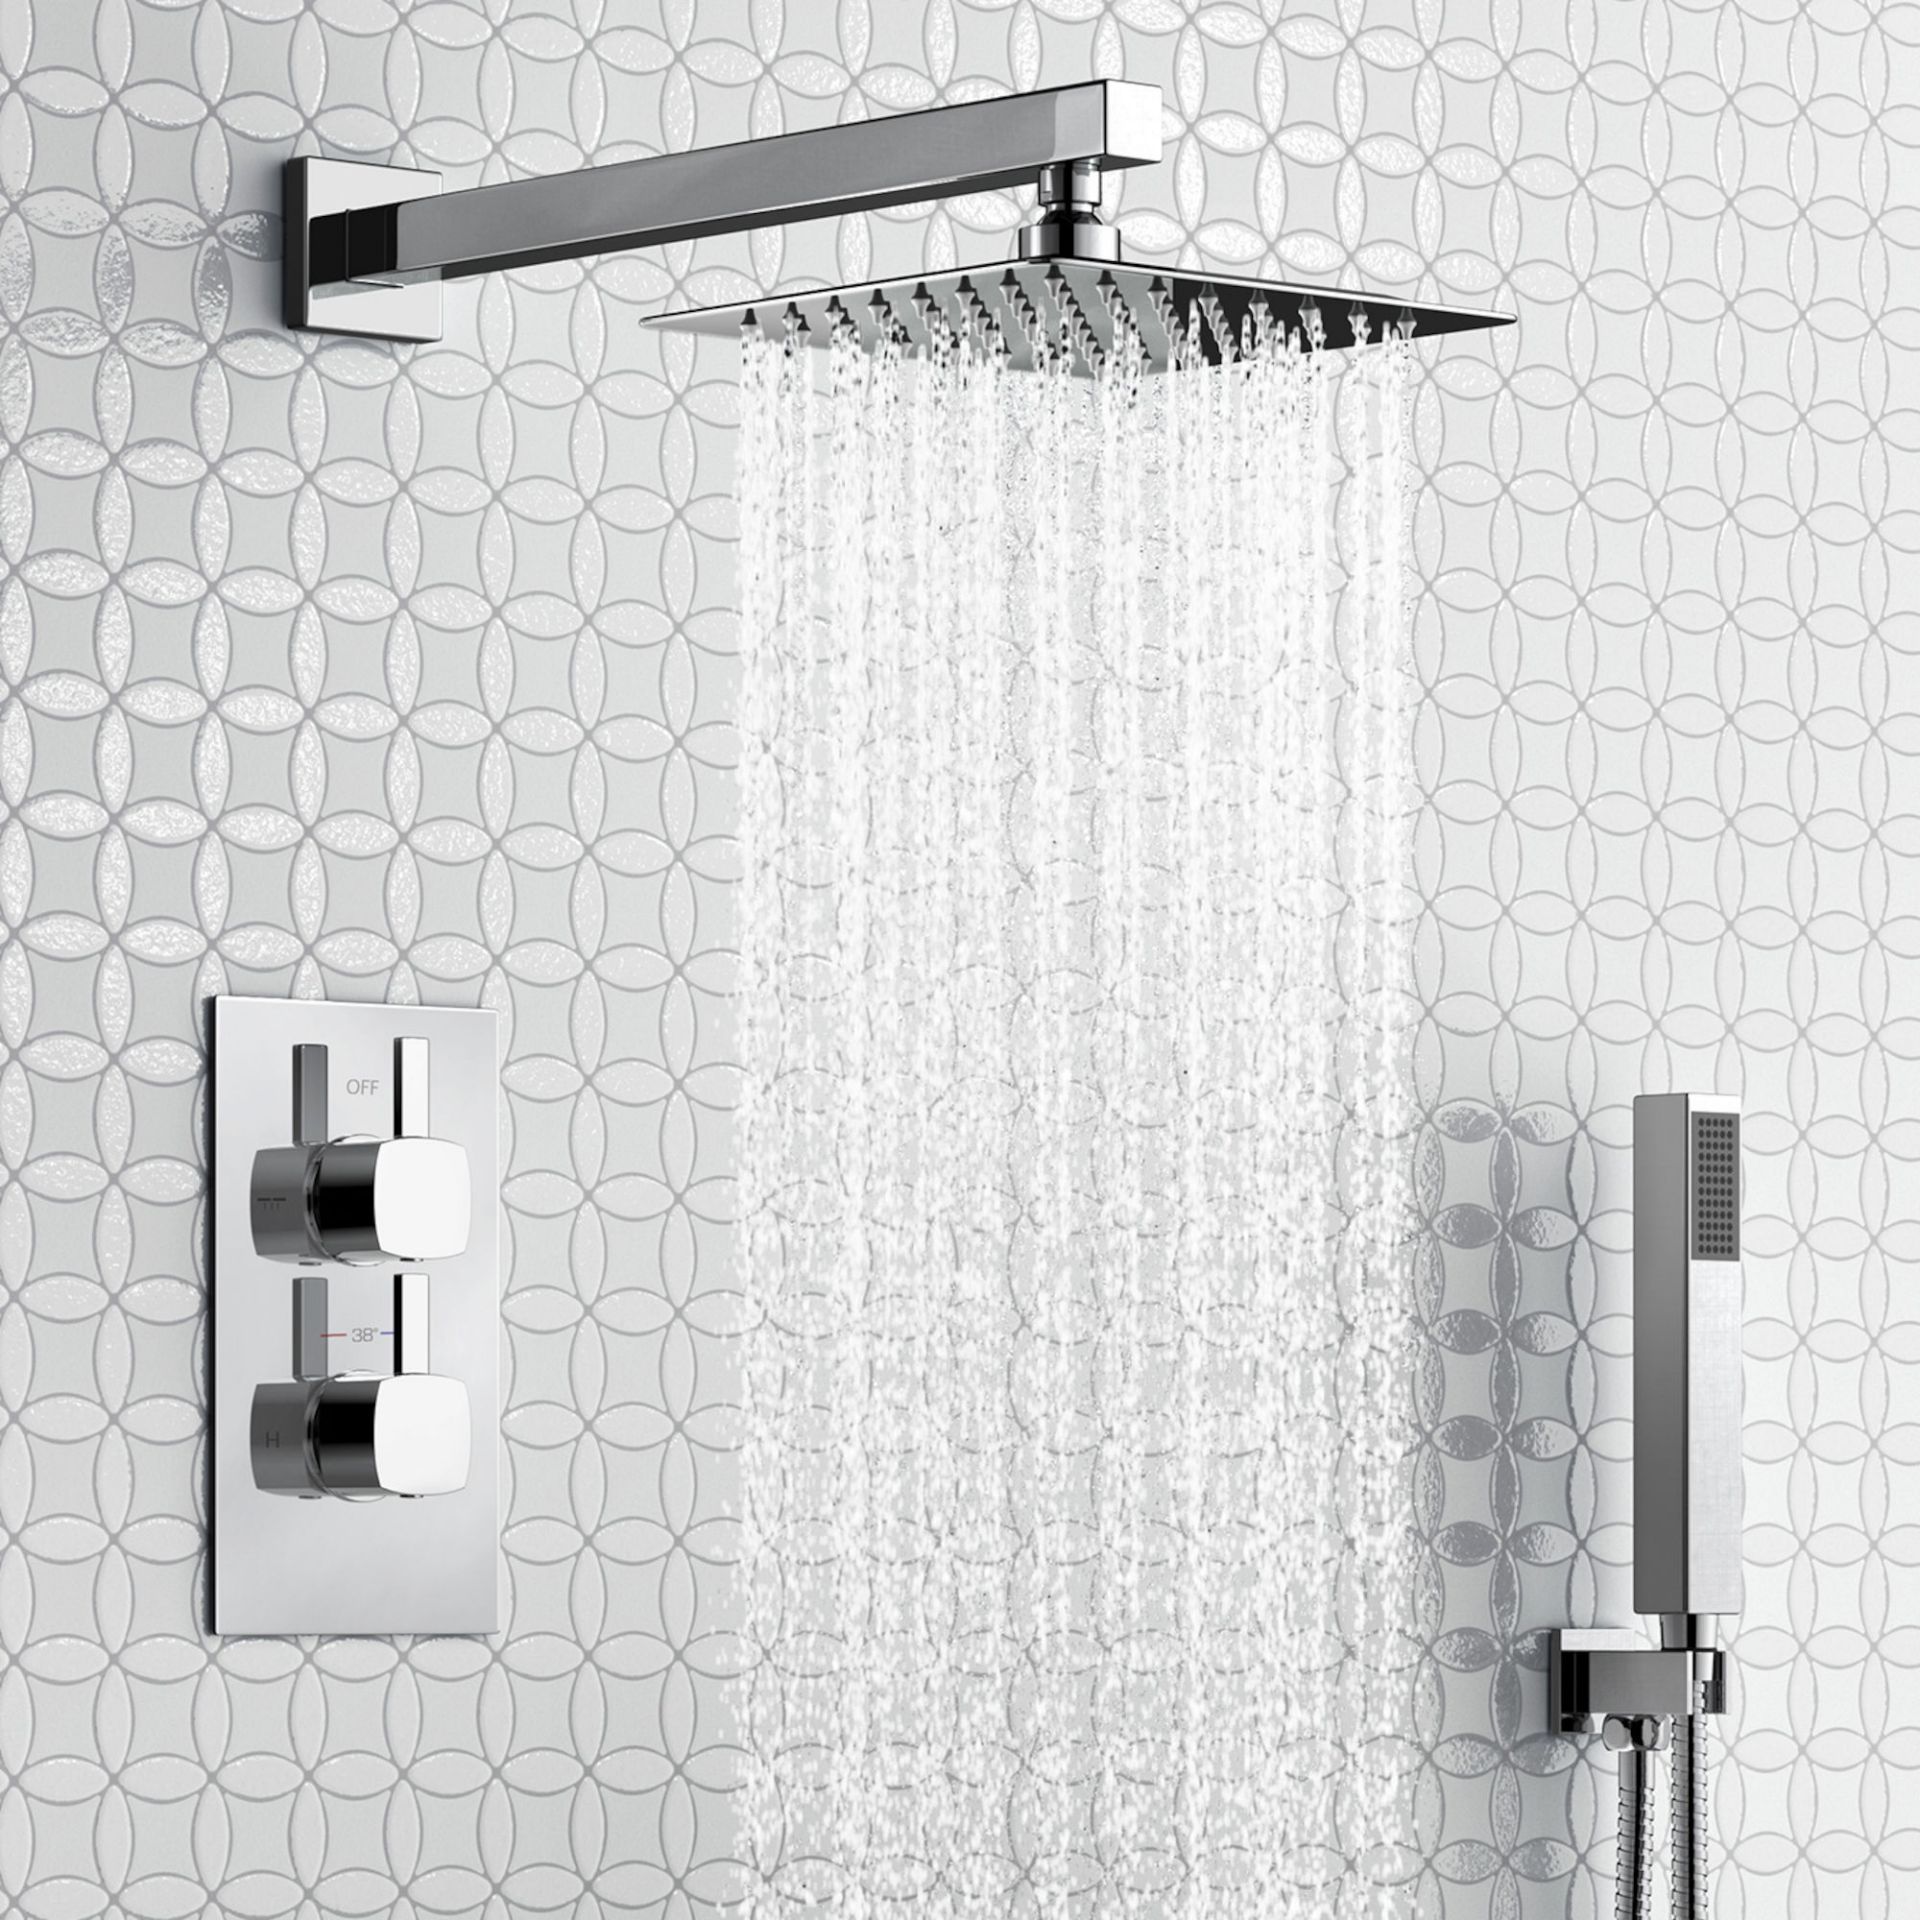 (SP88) Square Concealed Thermostatic Mixer Shower Kit & Medium Head. Family friendly detachable hand